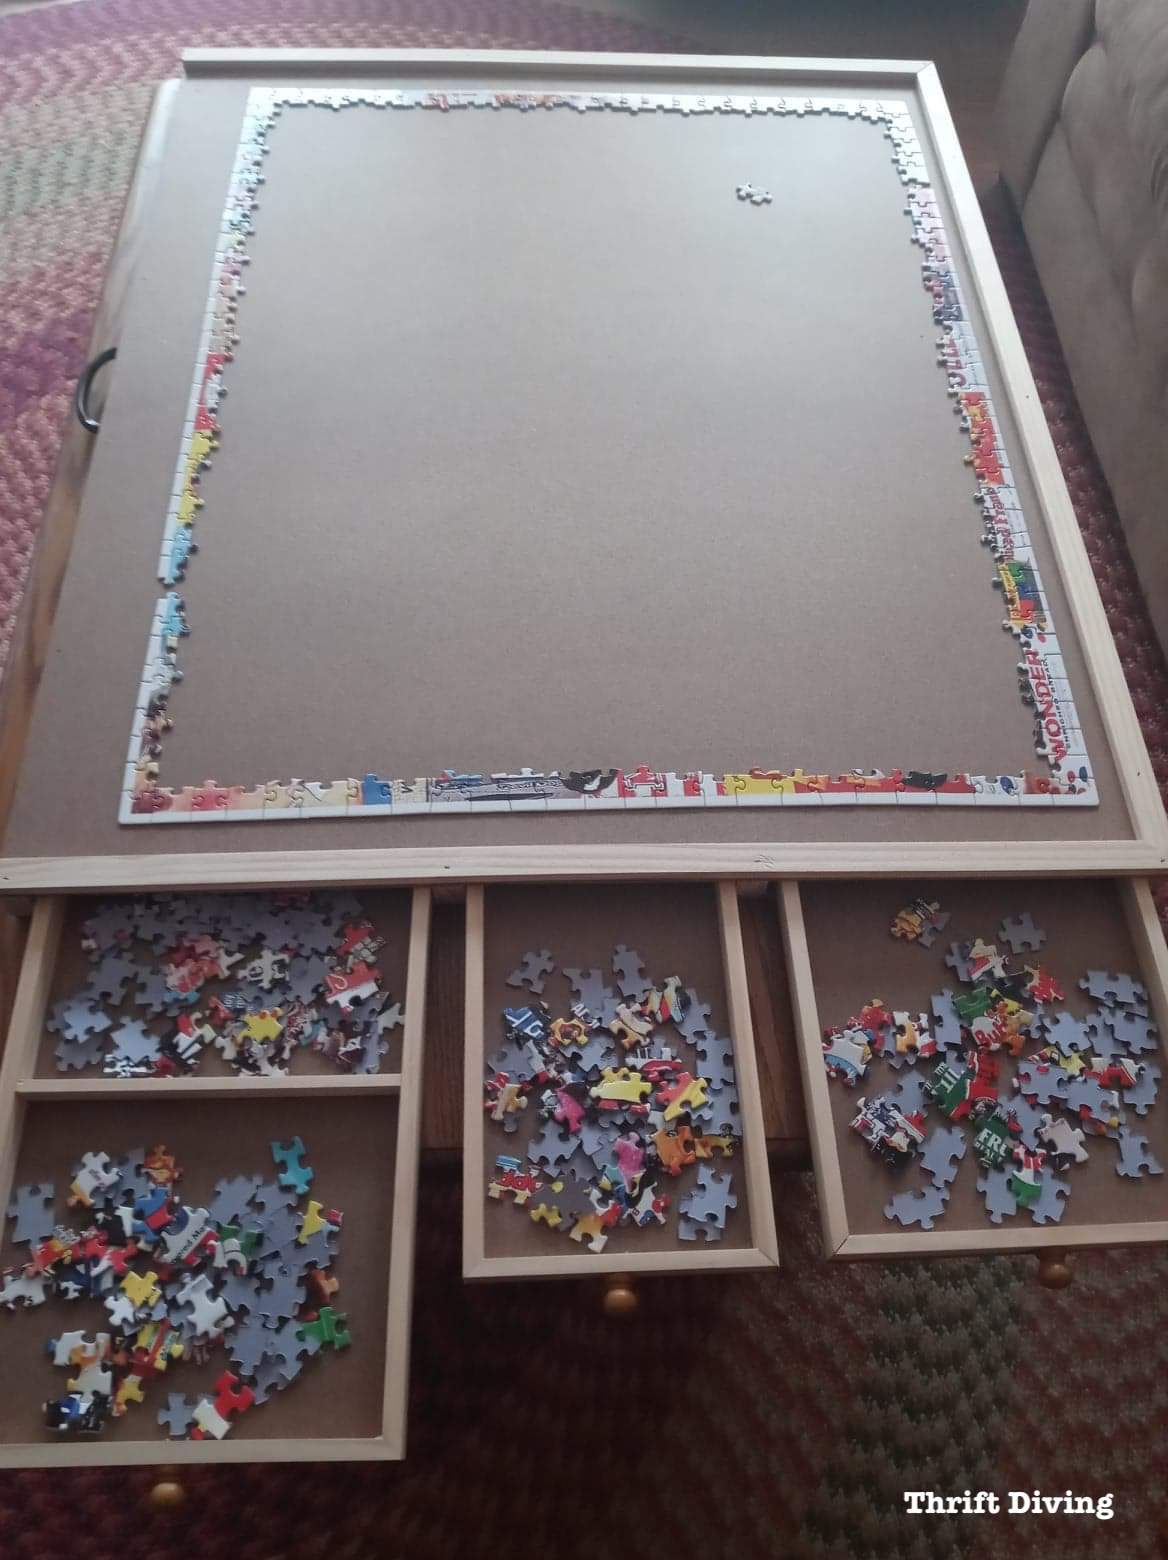 Bits and Pieces 1000 Piece Jigsaw Puzzle Lounger Table w/ Legs